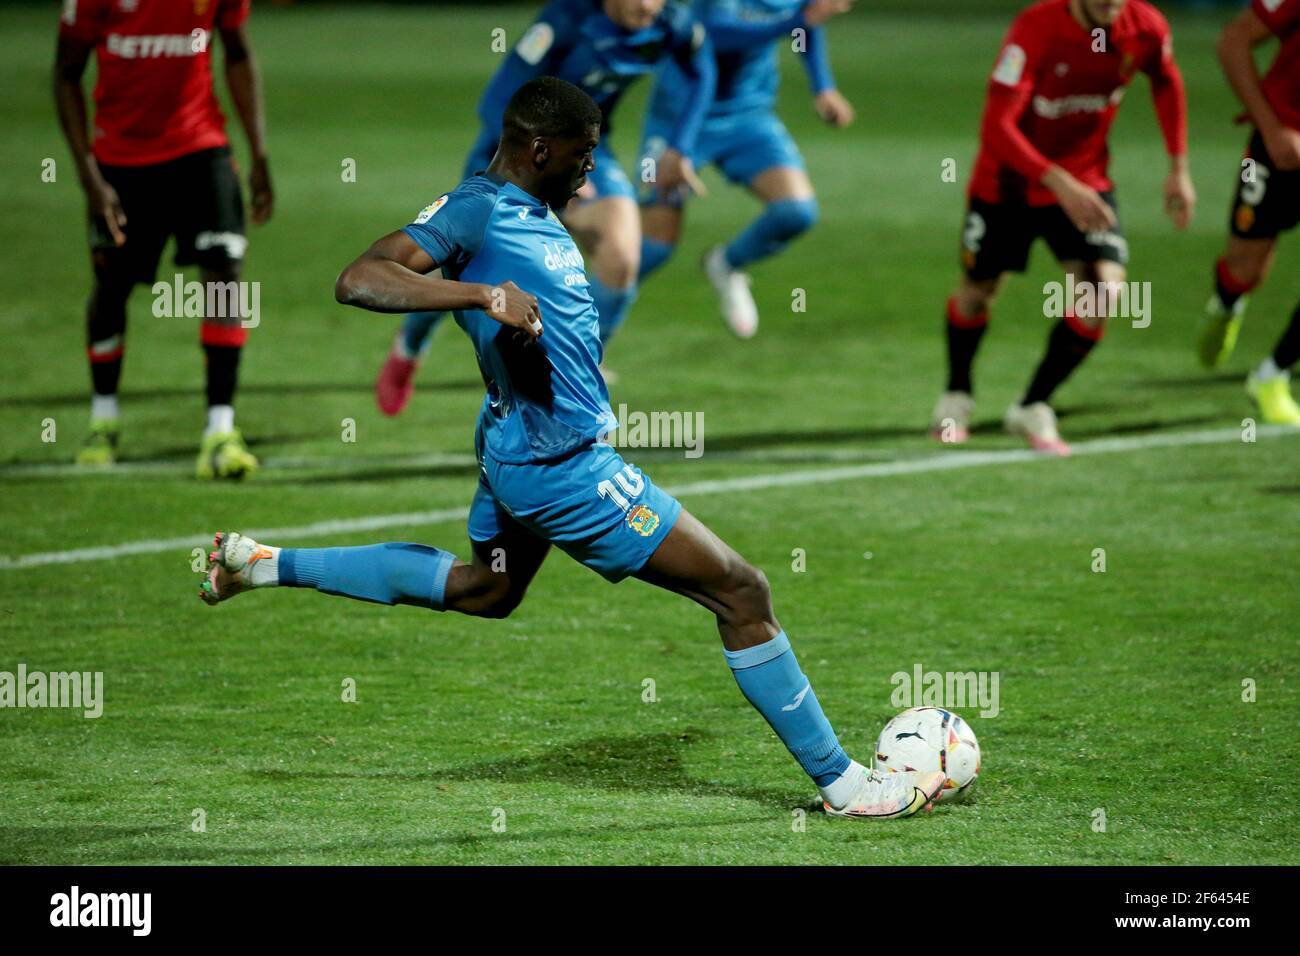 Fuenlabrada, Madrid, Spain, 29.03.2021C. F. Fuenlabrada against R. C. D. Mallorca match of the second division of Spanish soccer in match 31. Fuenlabrada player Nteka penalty goal Final score 4-1 winner Fuenlabrada with goals from the players Oscar Pichi 13 y 38  Nteka 41  and Pathe Ciss 73  Mallorca scores his player Mboula 56  Photo: Juan Carlos Rojas/Picture Alliance | usage worldwide Stock Photo